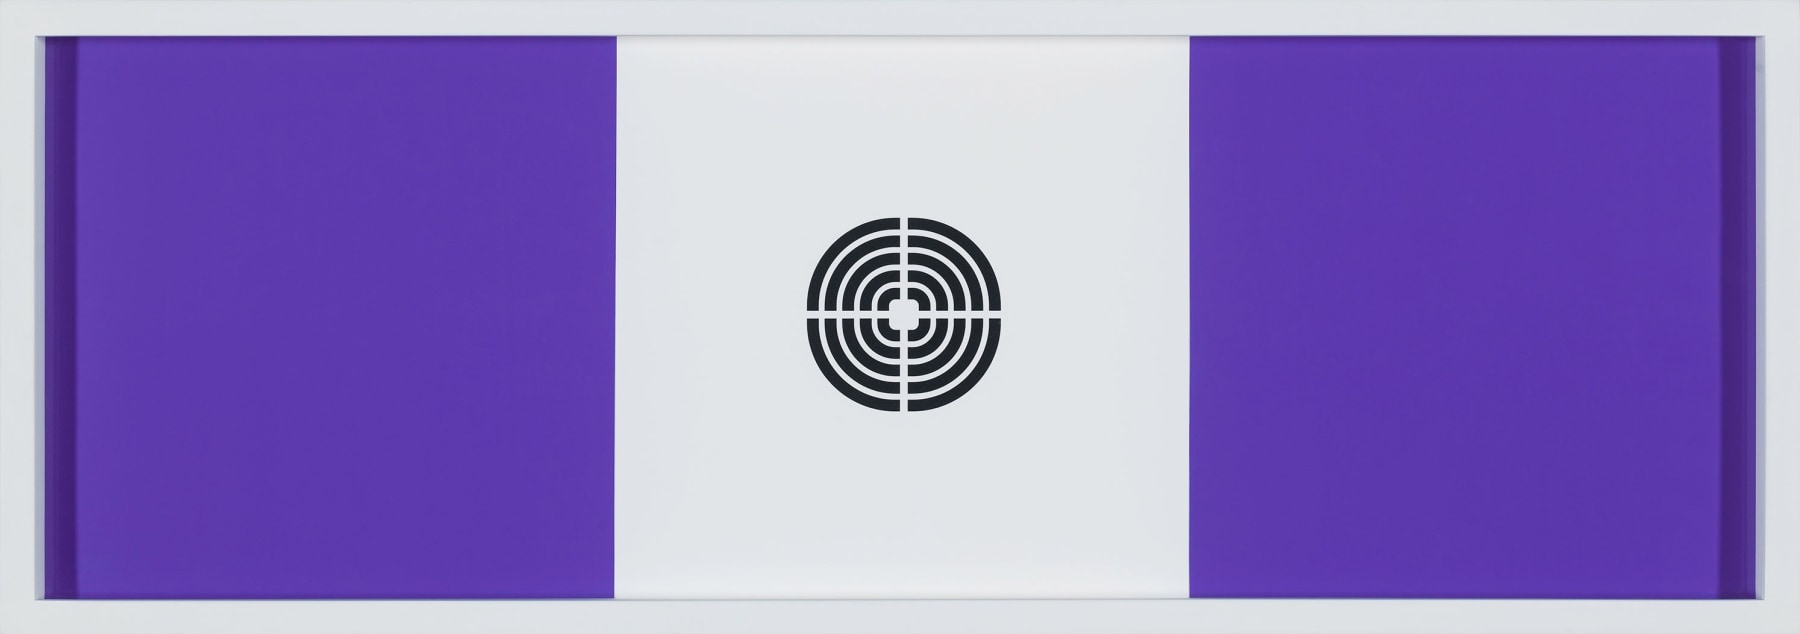 Long purple rectangle with grey square and target in center.